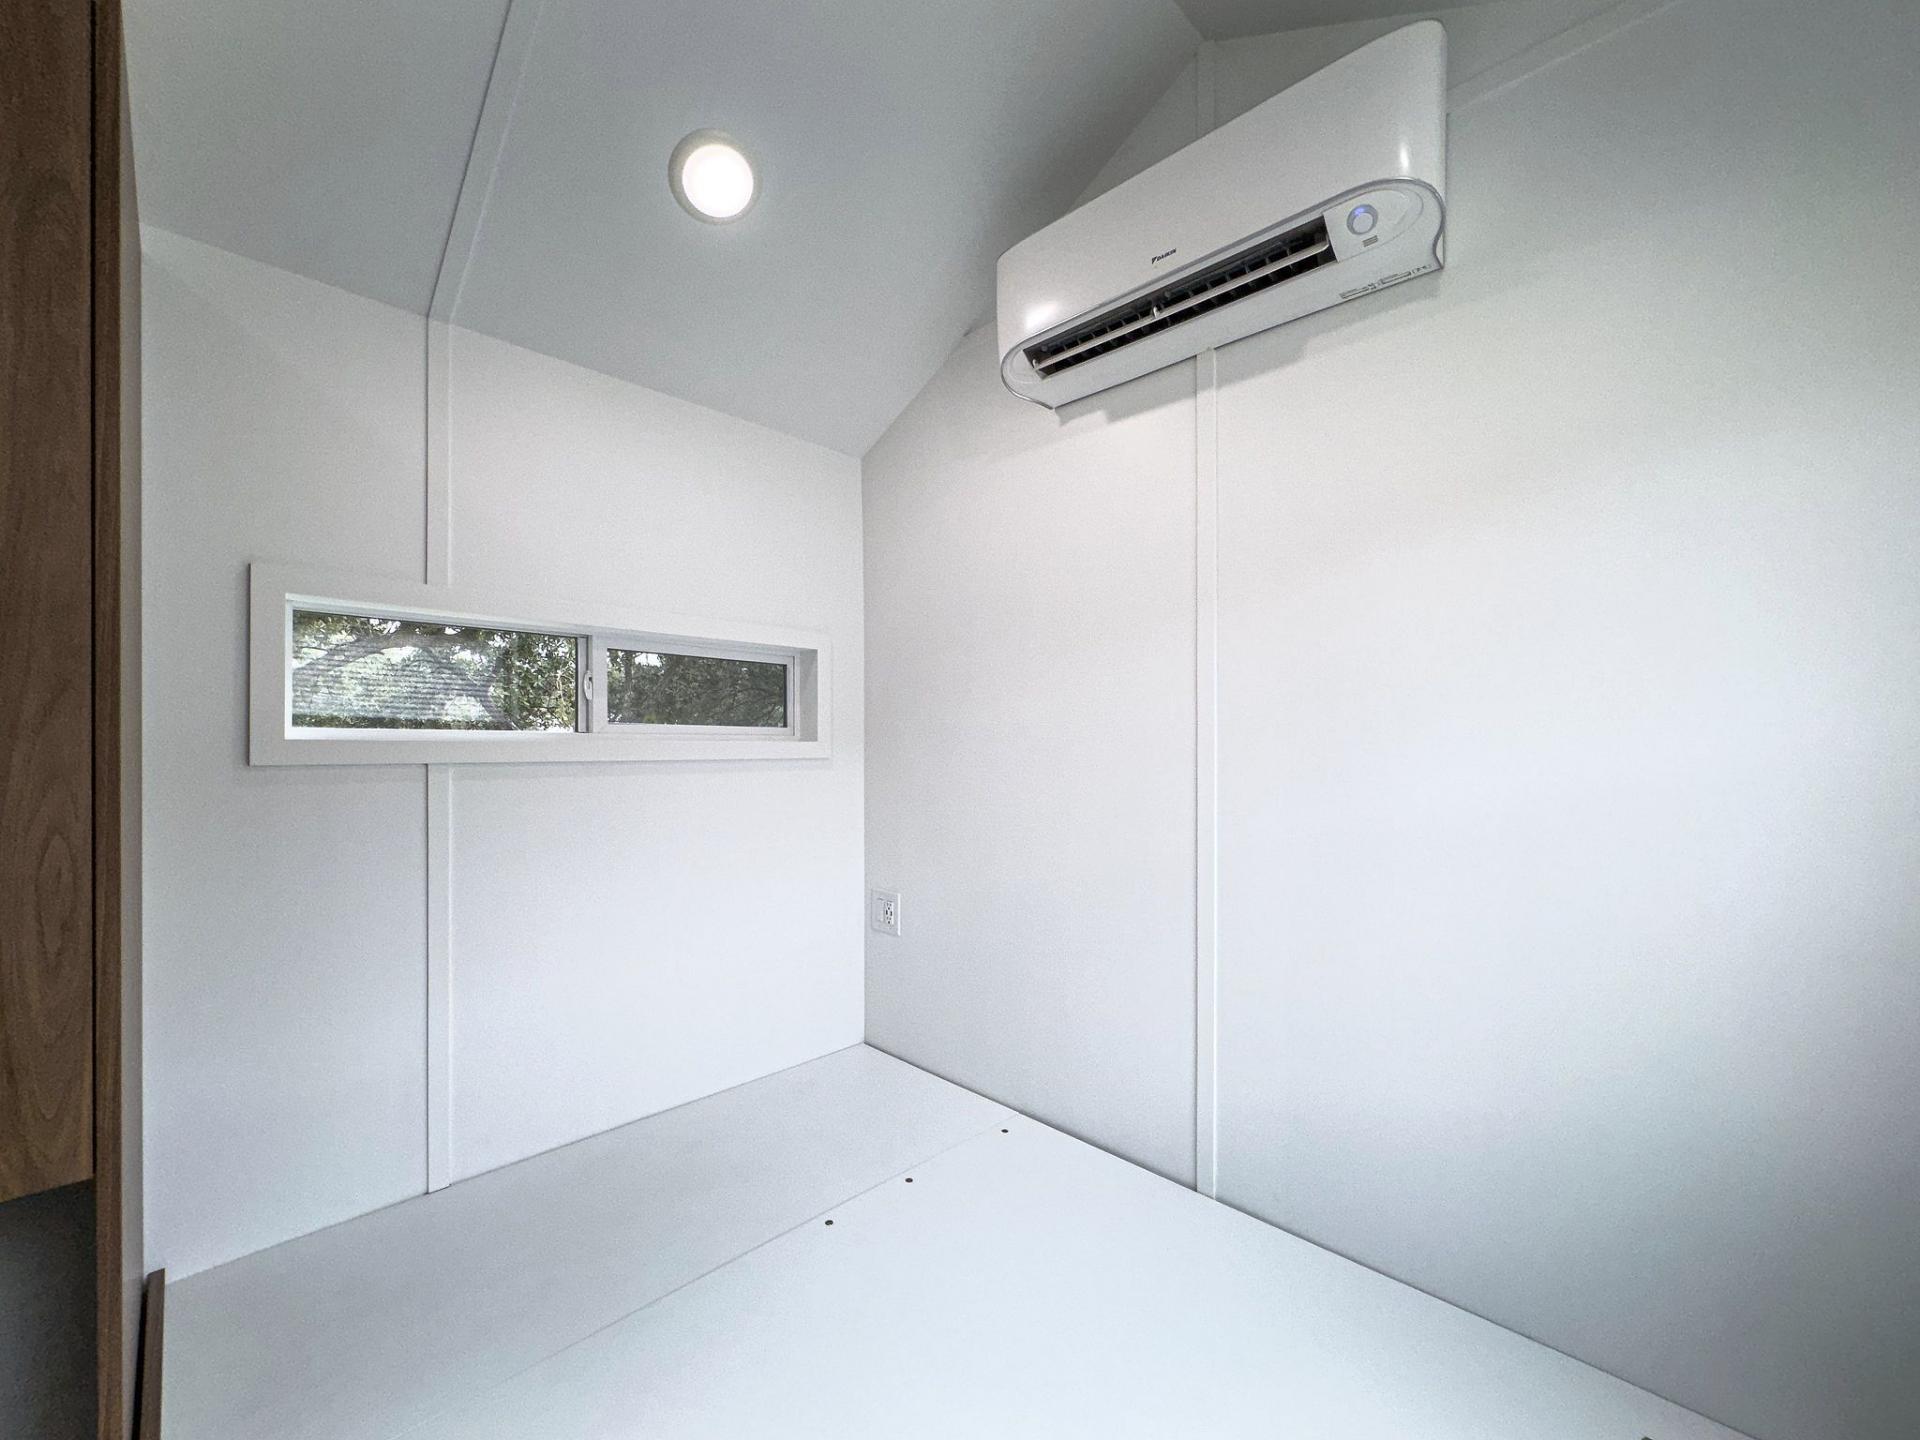 Bedroom & AC Unit - 20' Jojo Bean by Movable Roots